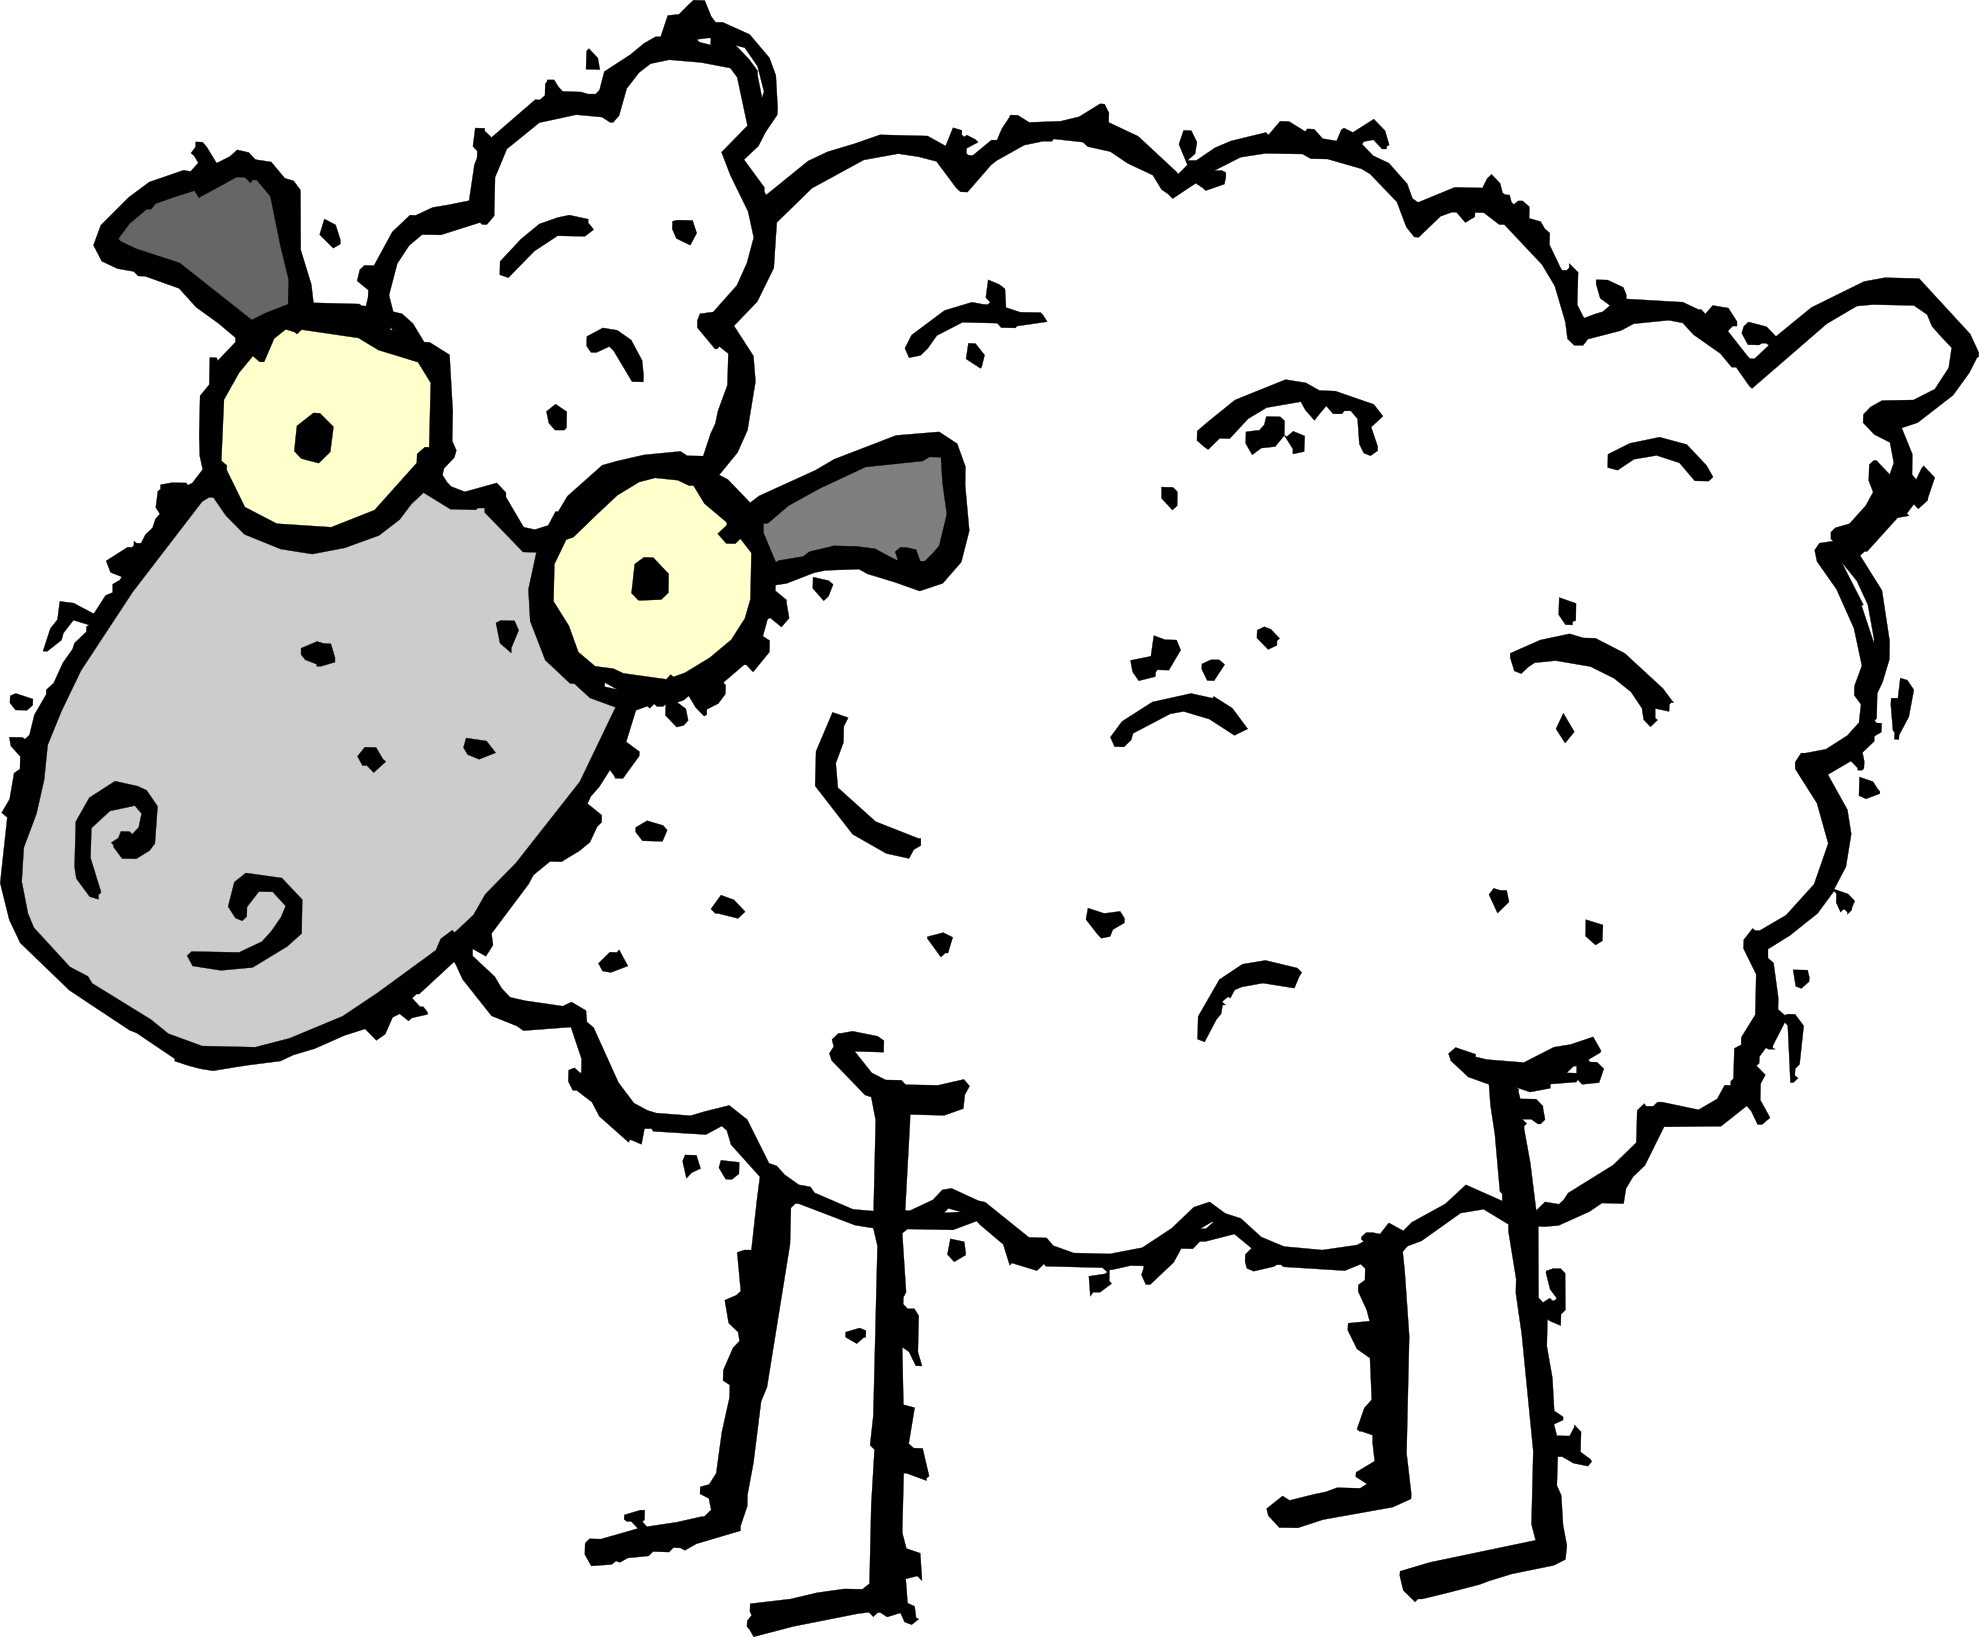 Images For > Sheep Images Clip Art